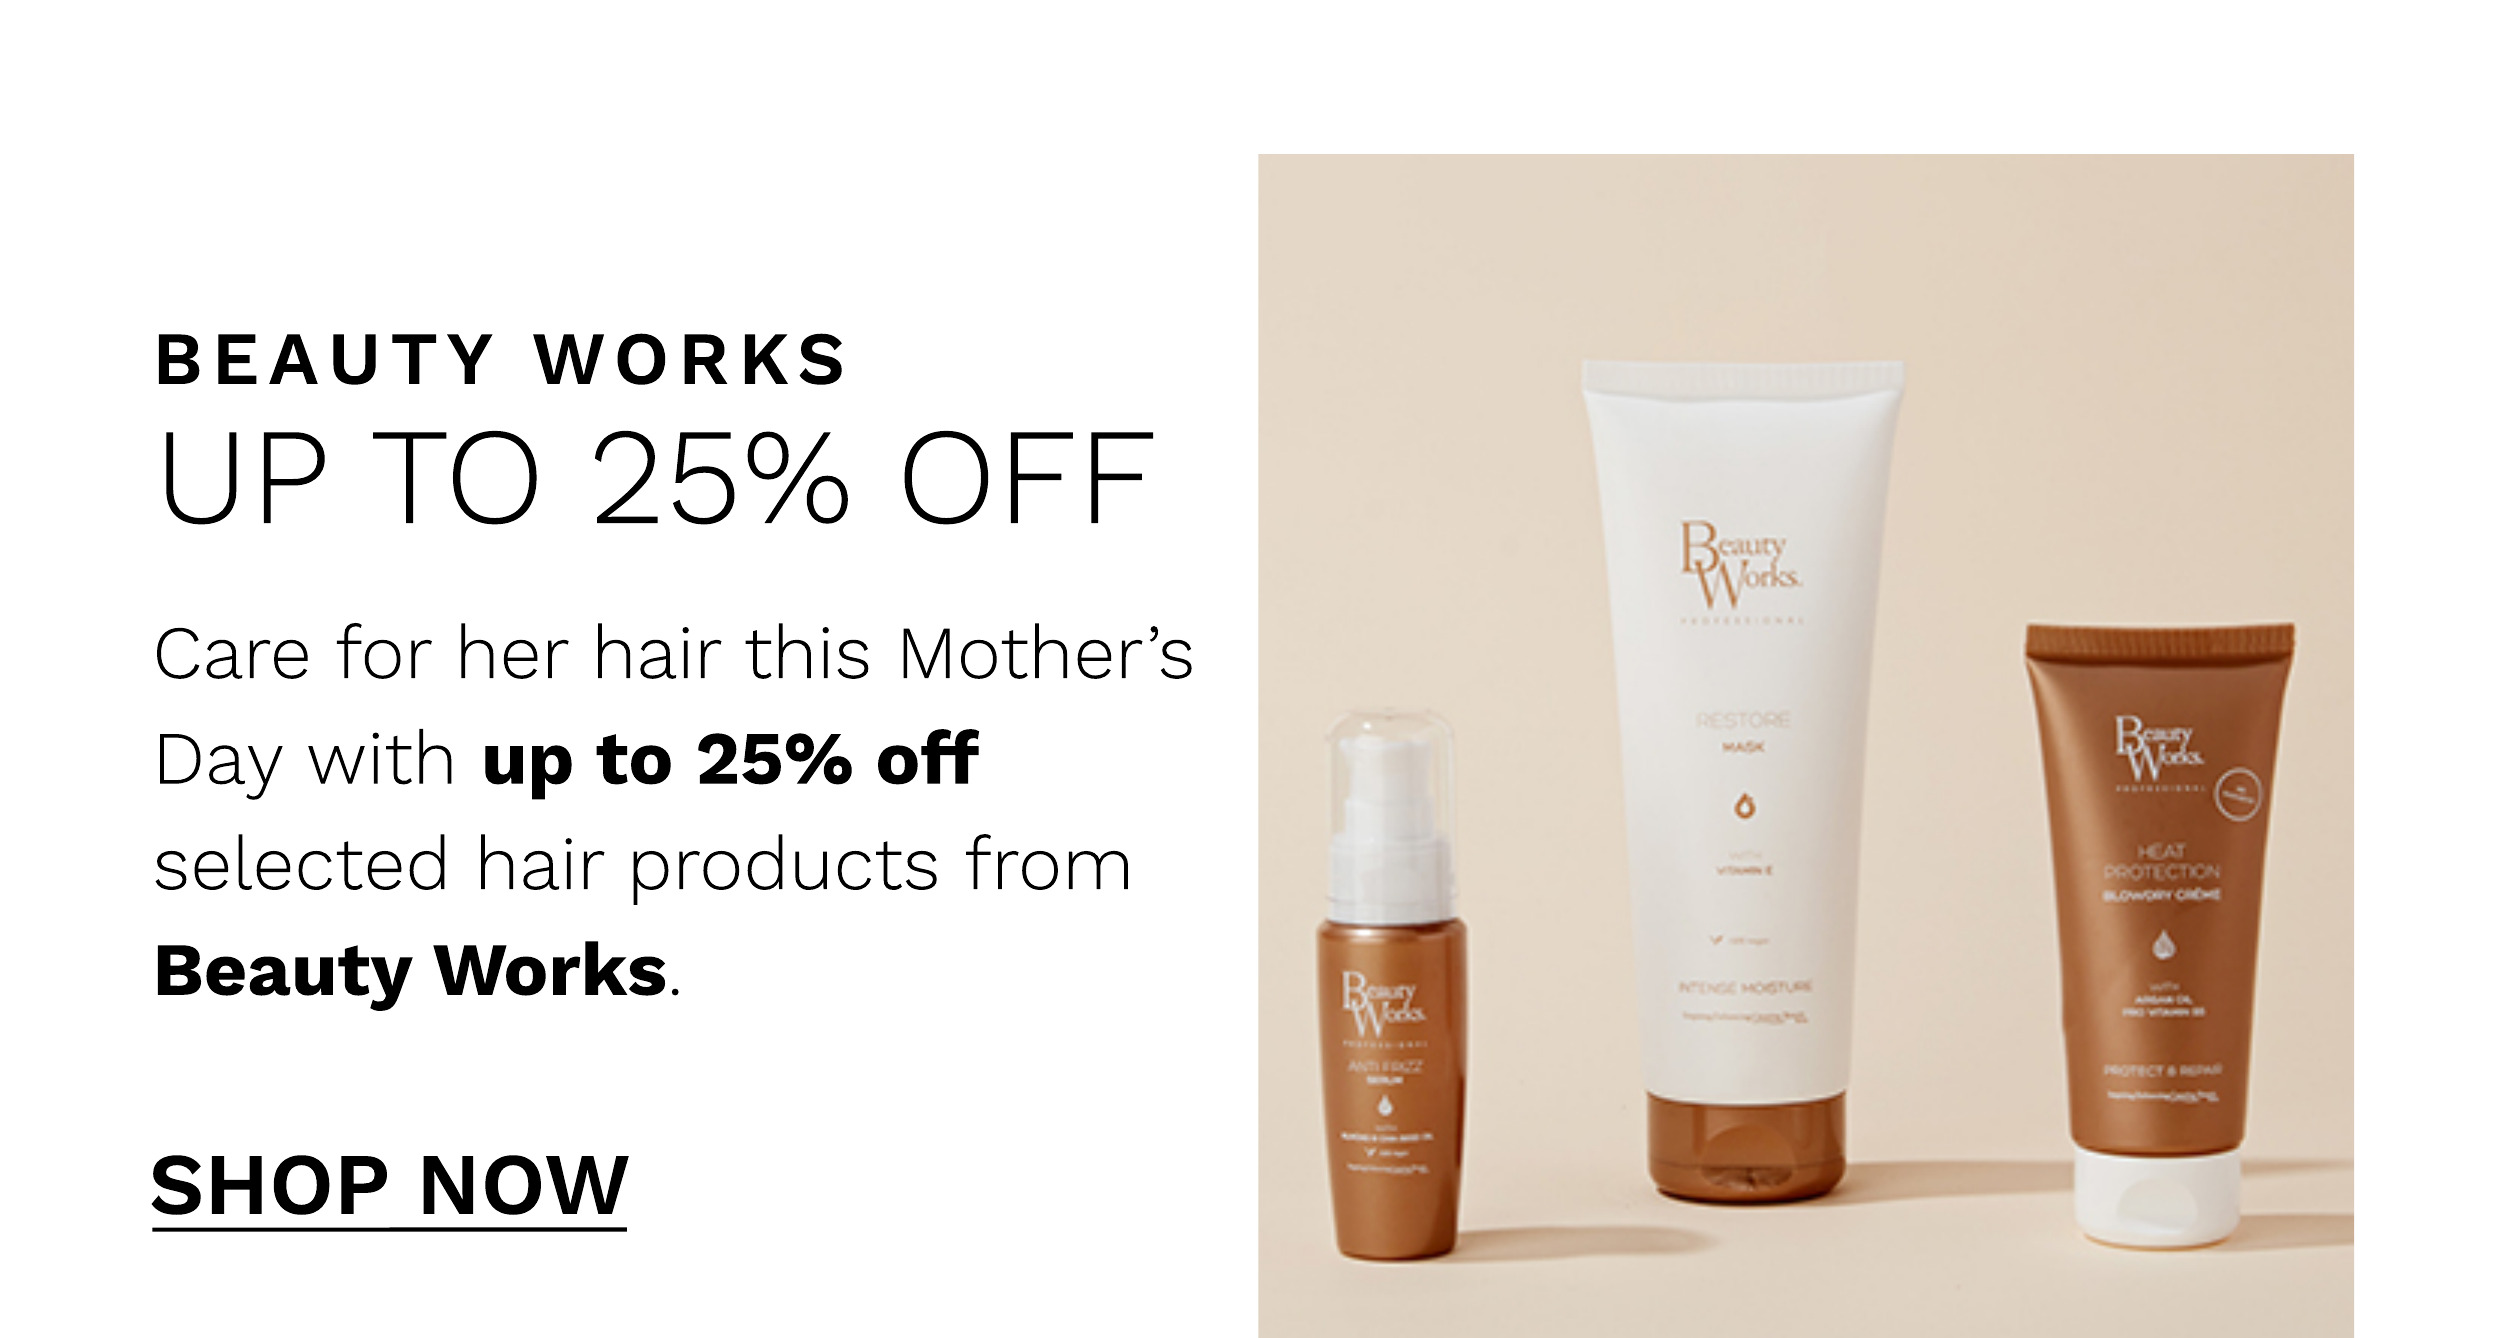 BEAUTY WORKS UP TO 25% OFF Care for her hair this Mothers Day with up to 25% off selected hair products from Beauty Works. SHOP NOW 